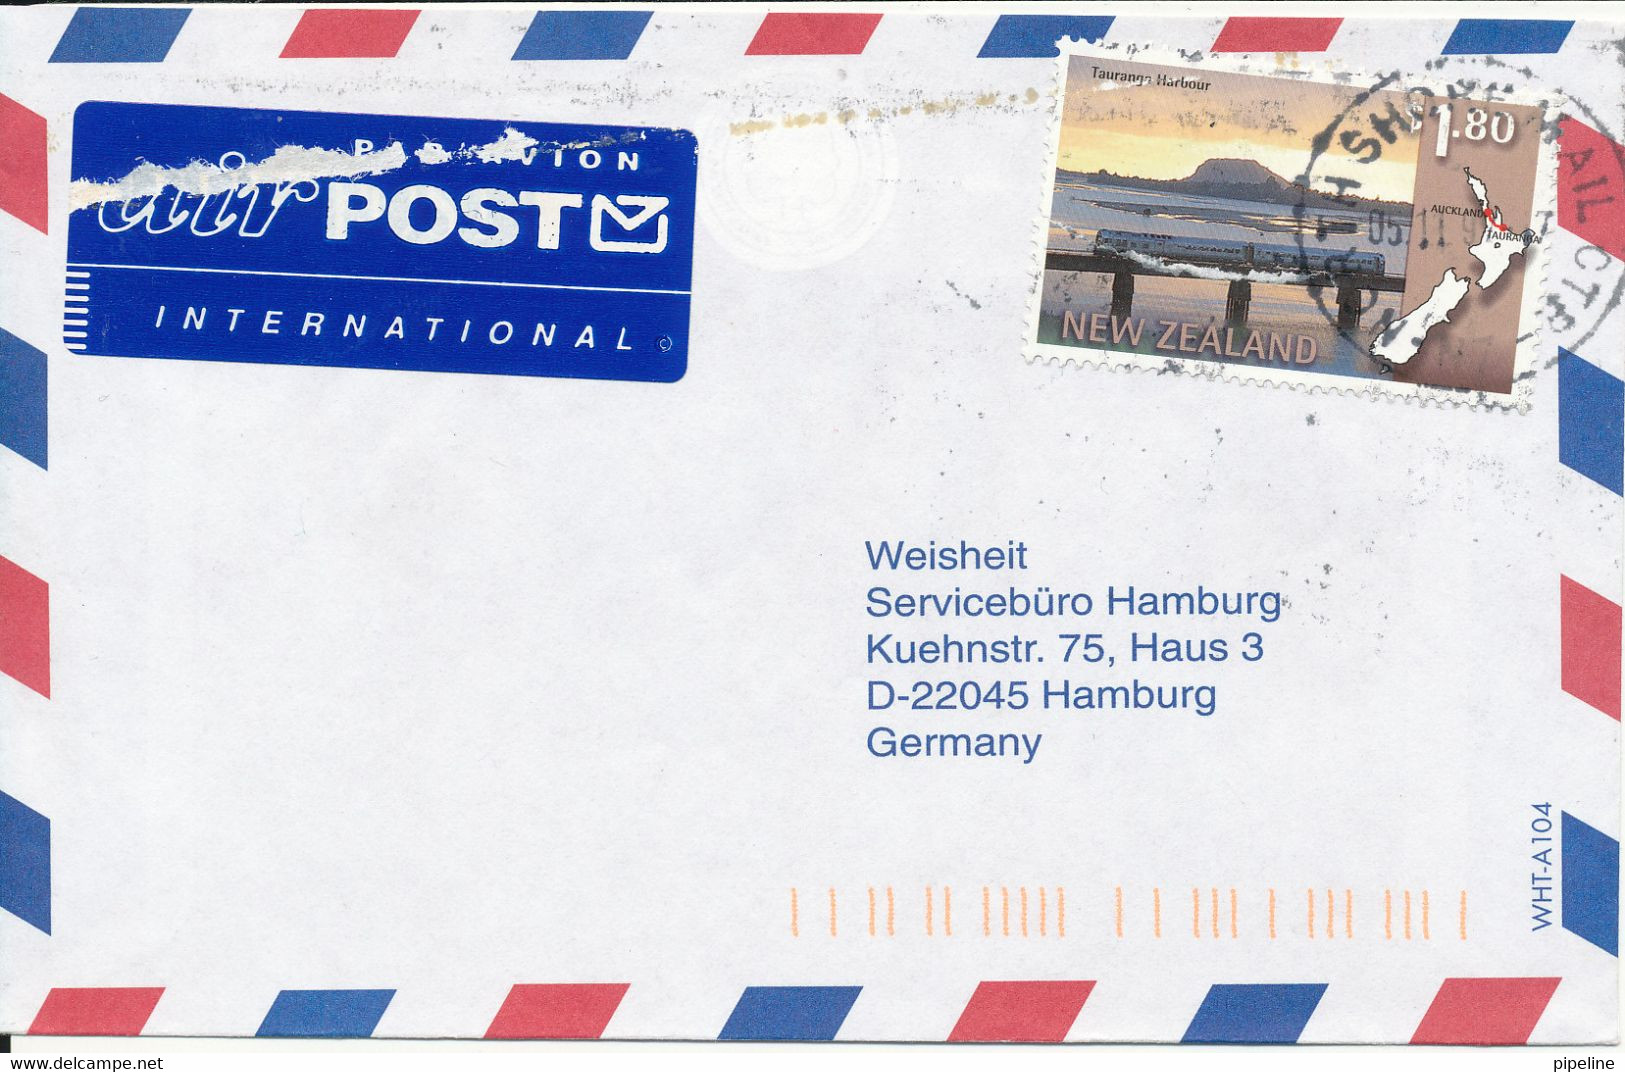 New Zealand Air Mail Cover Sent To Germany 5-11-1997 Single Franked - Luftpost